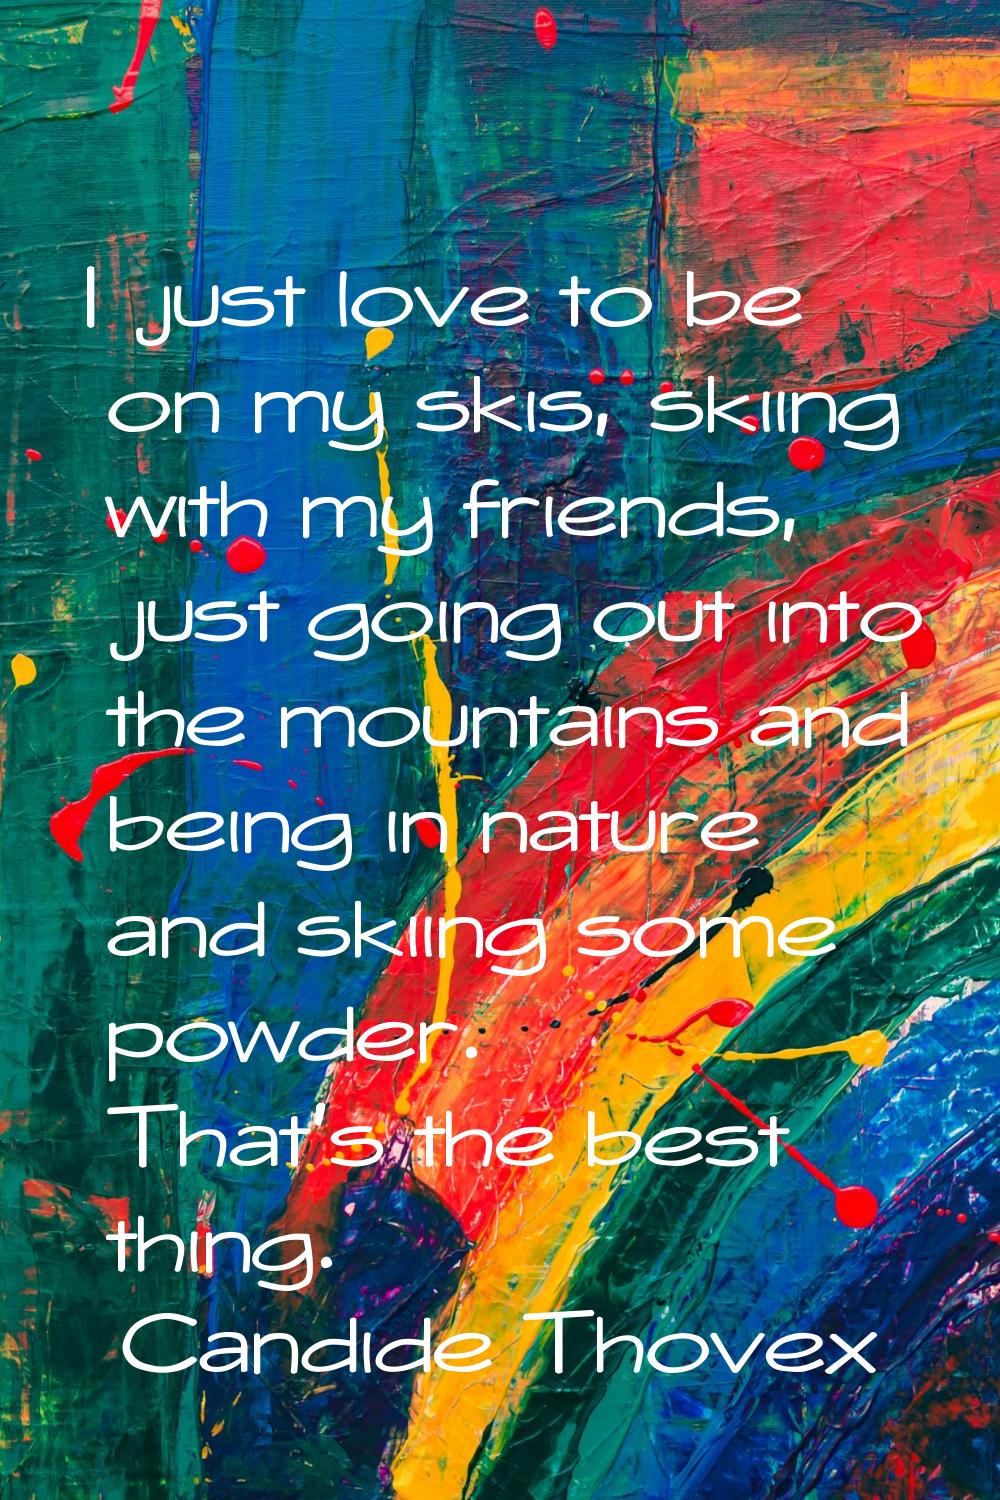 I just love to be on my skis, skiing with my friends, just going out into the mountains and being i